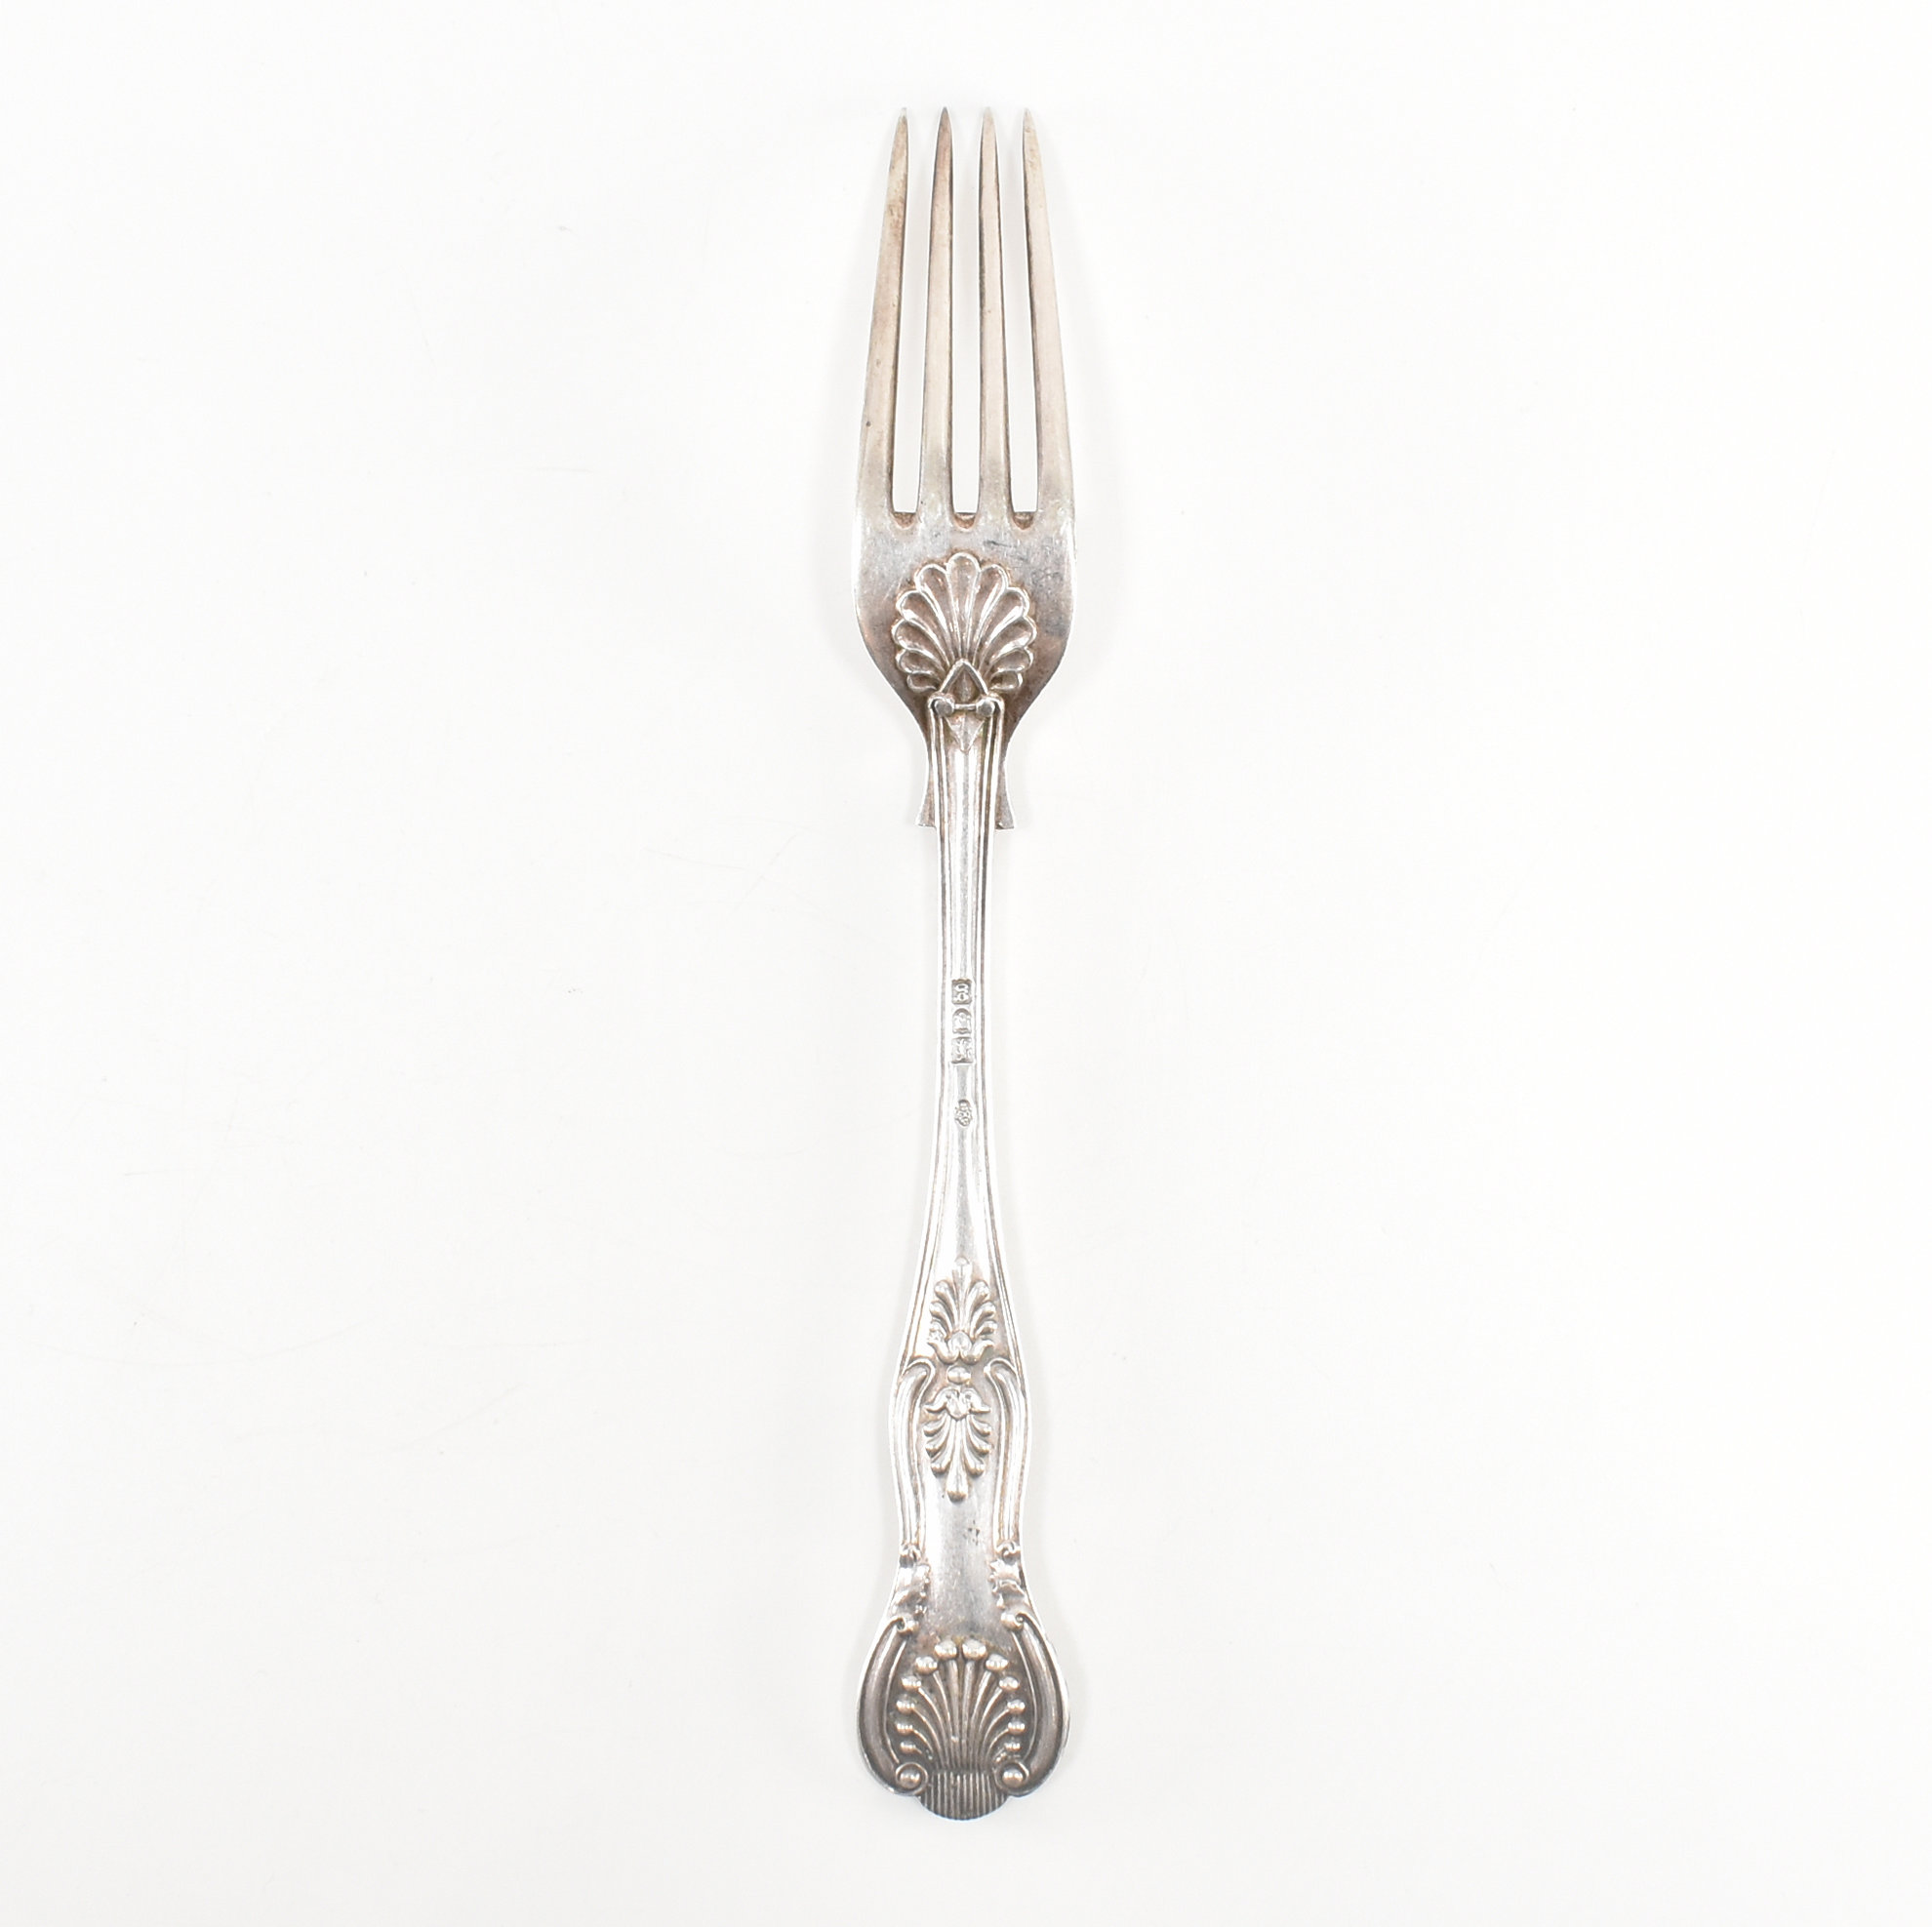 EARLY EDWARDIAN HALLMARKED SILVER FORK - Image 2 of 5